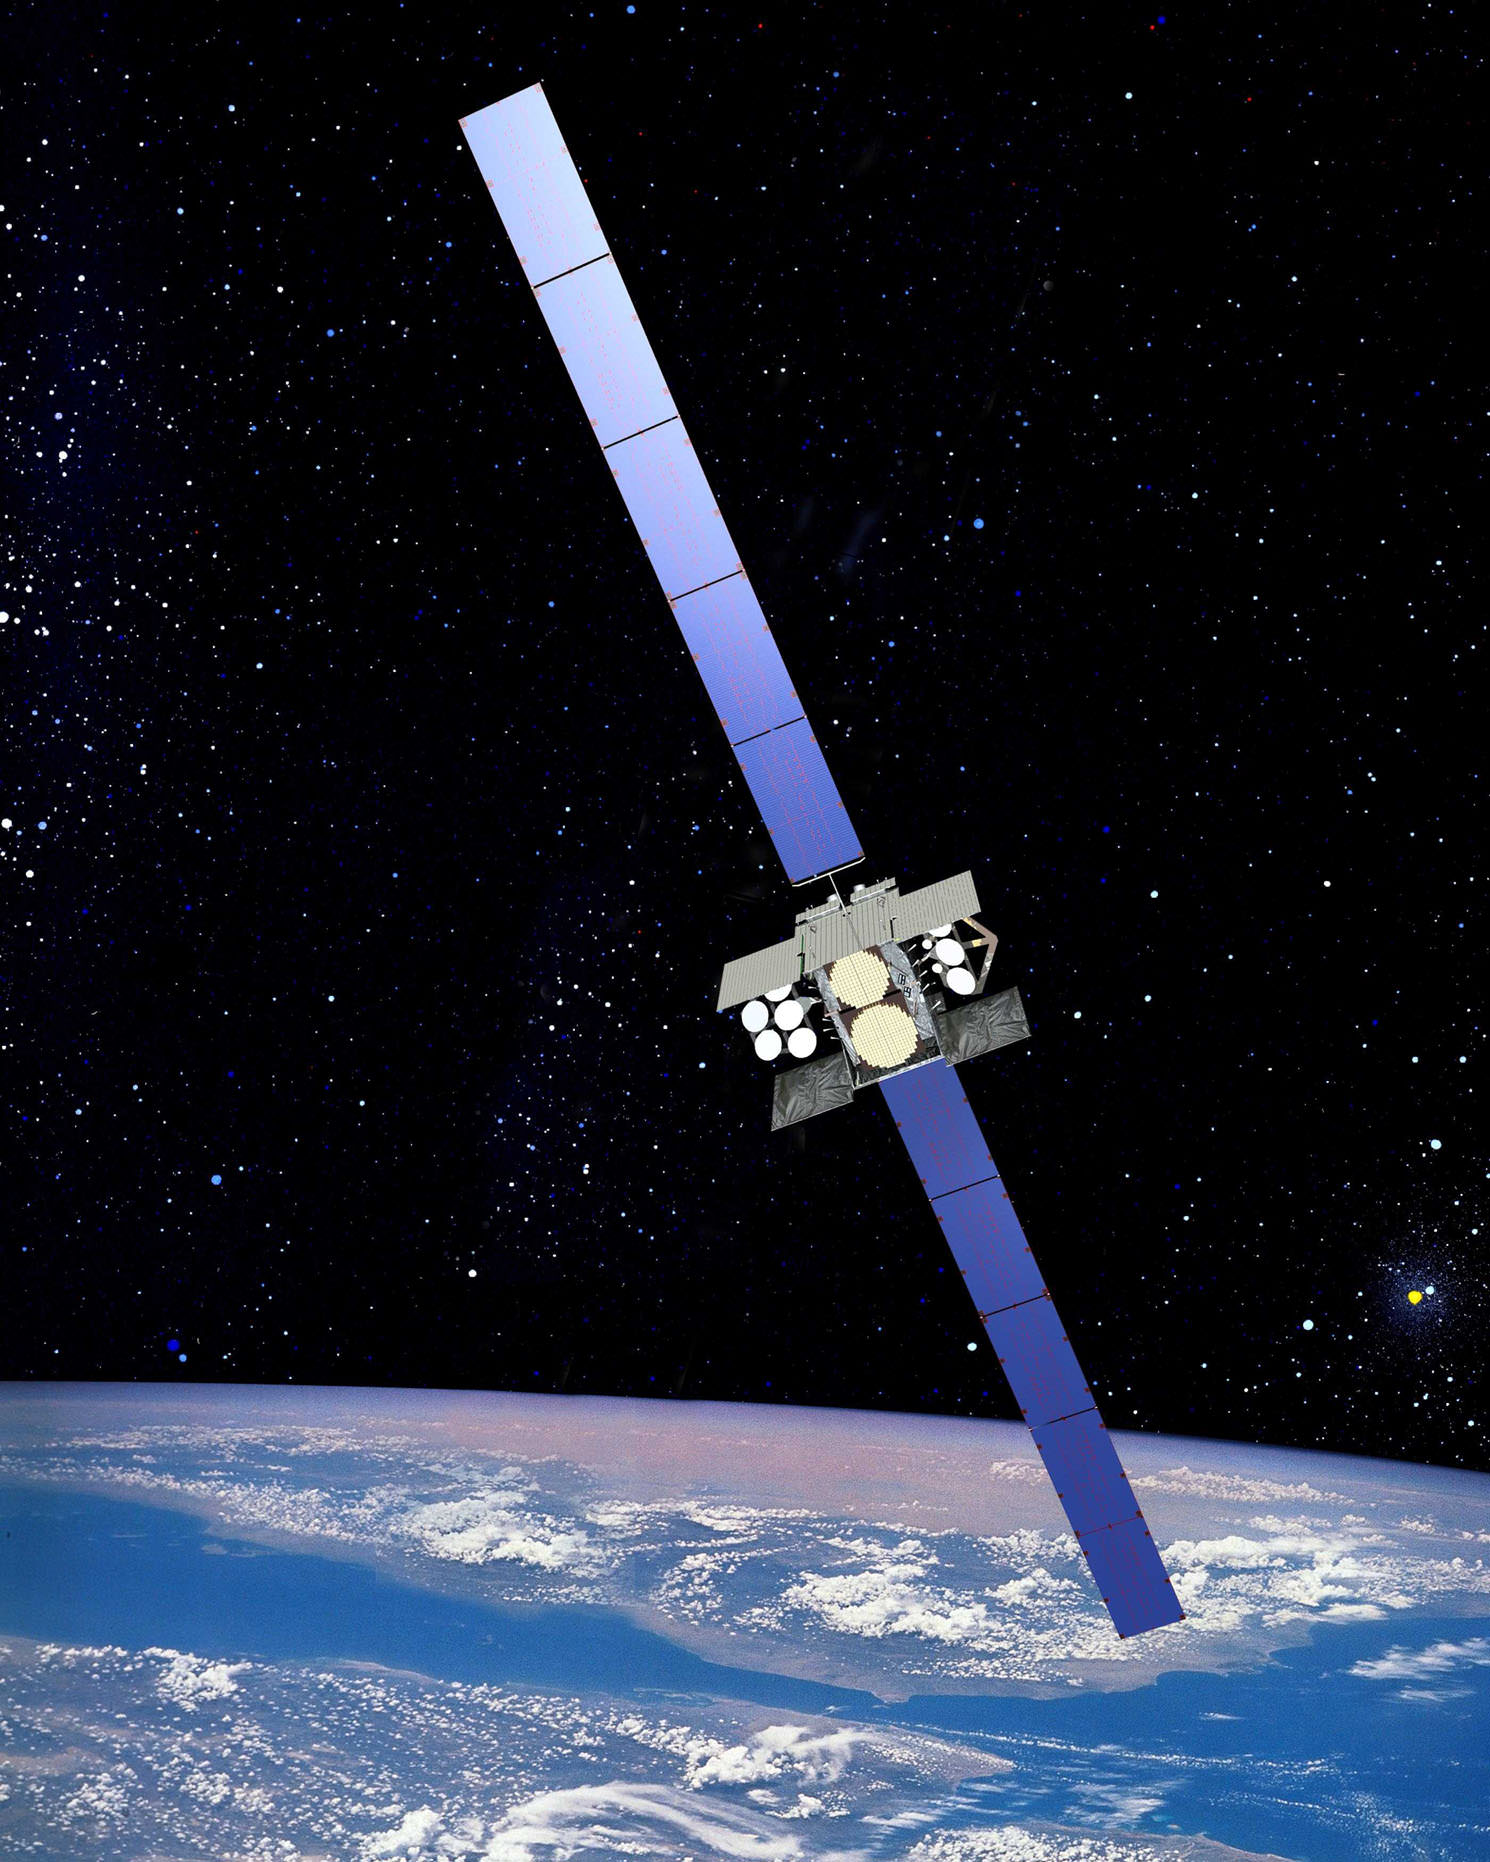 Wideband Global SATCOM-7 (WGS-7) communications satellite artist’s concept. Credit: Boeing